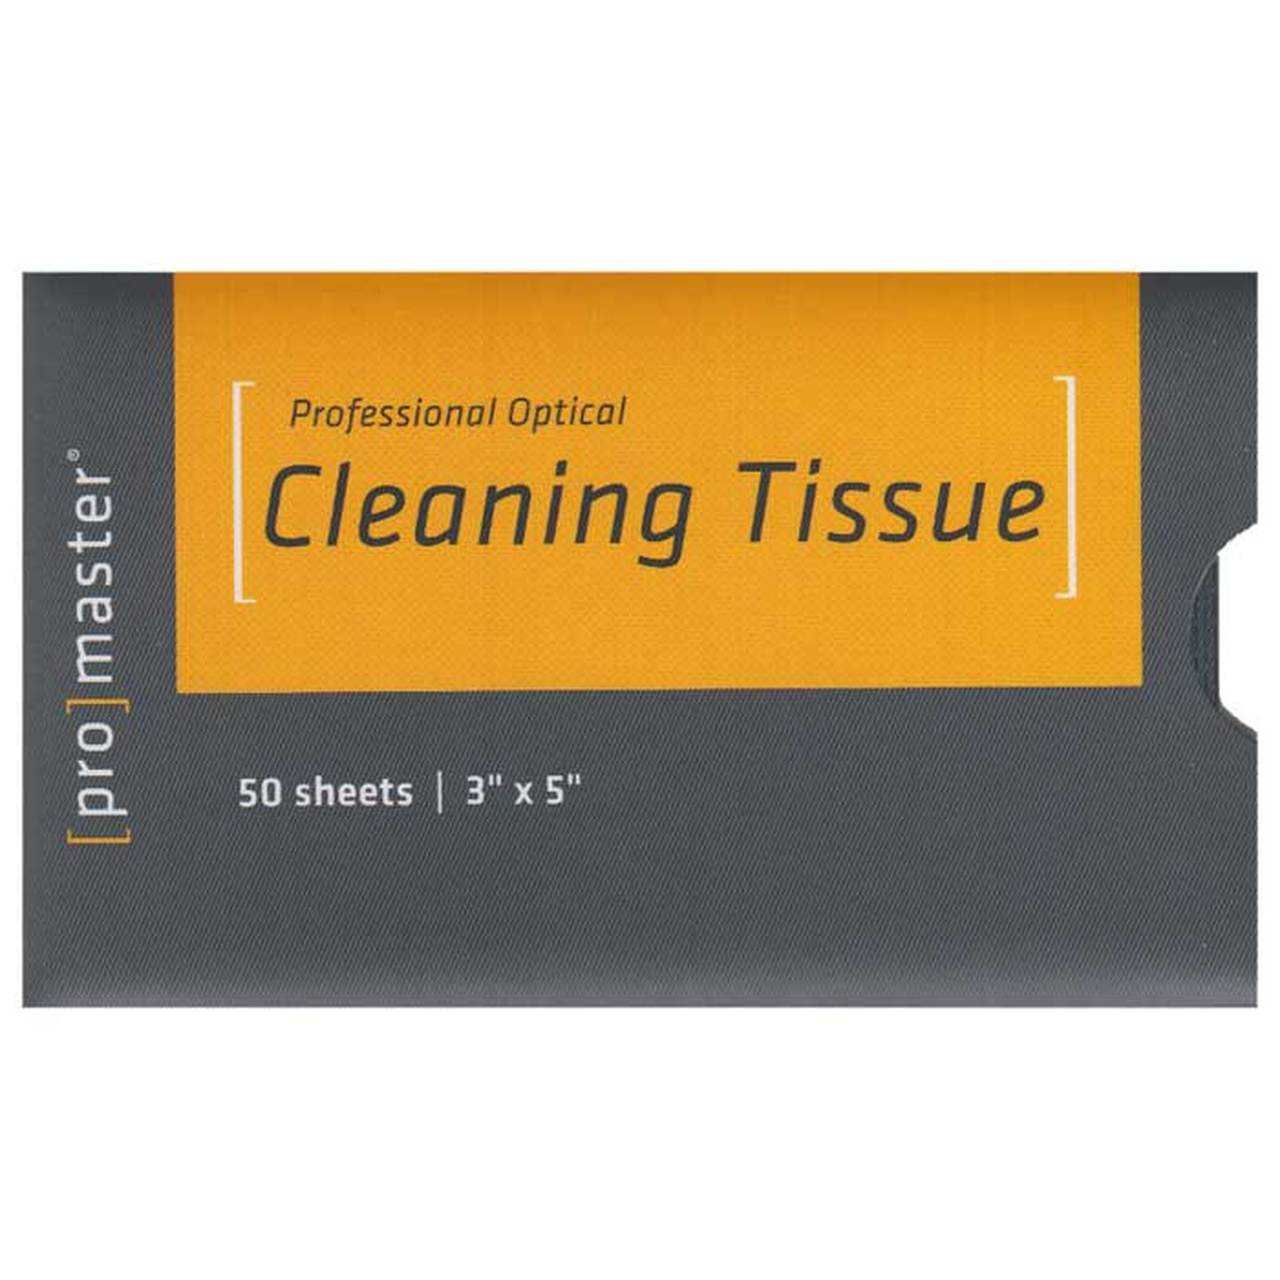 Promaster 4893 Professional Optical Cleaning Tissue - 50 sheets - 3"x5"